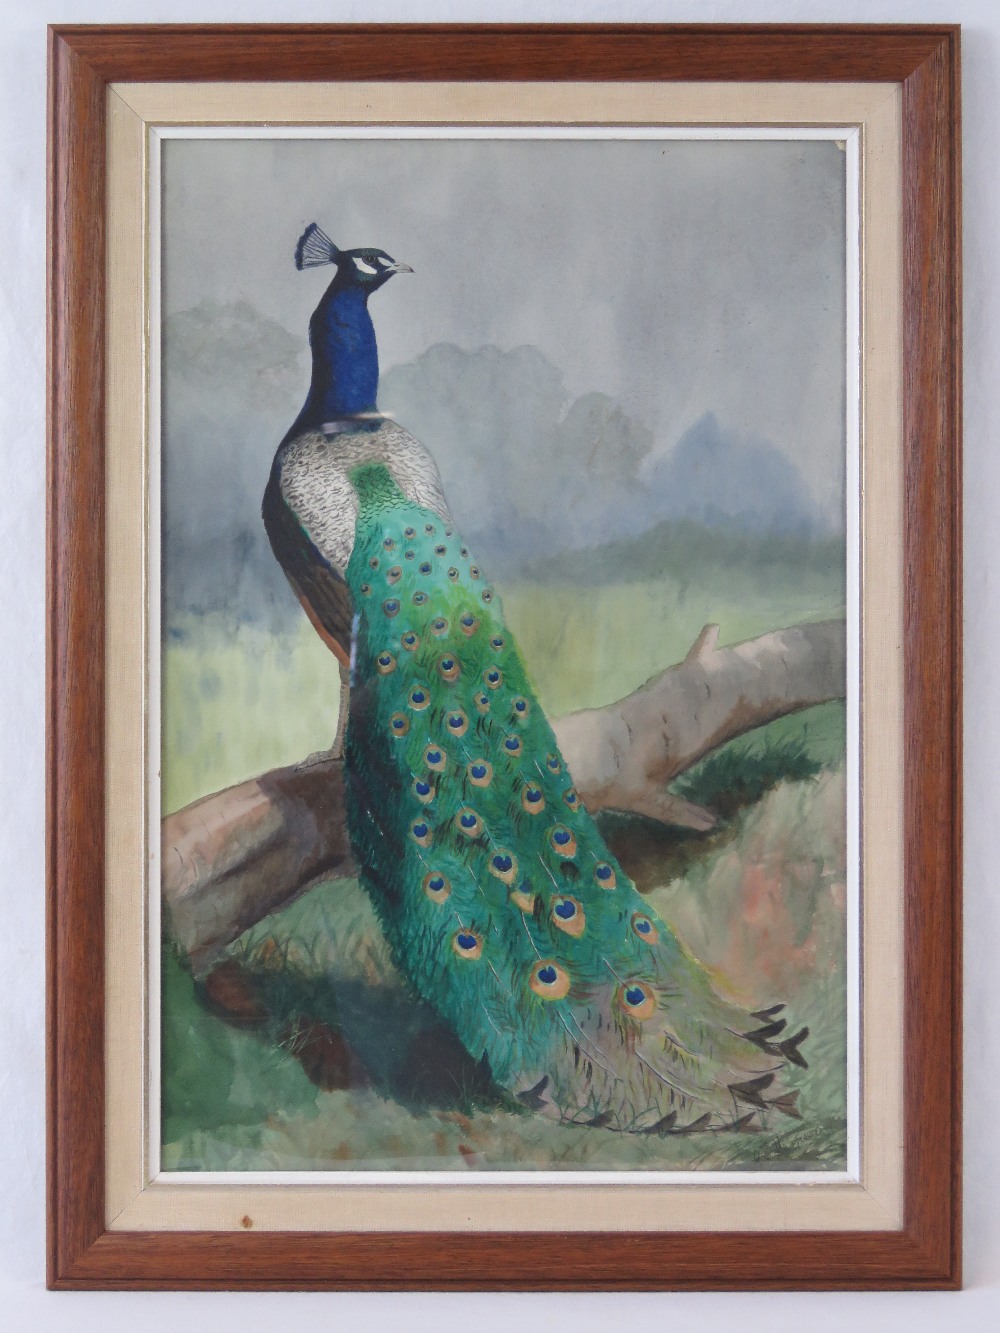 Watercolour; peacock on branch, trees and sky beyond, signed lower right R.C. Harrison.